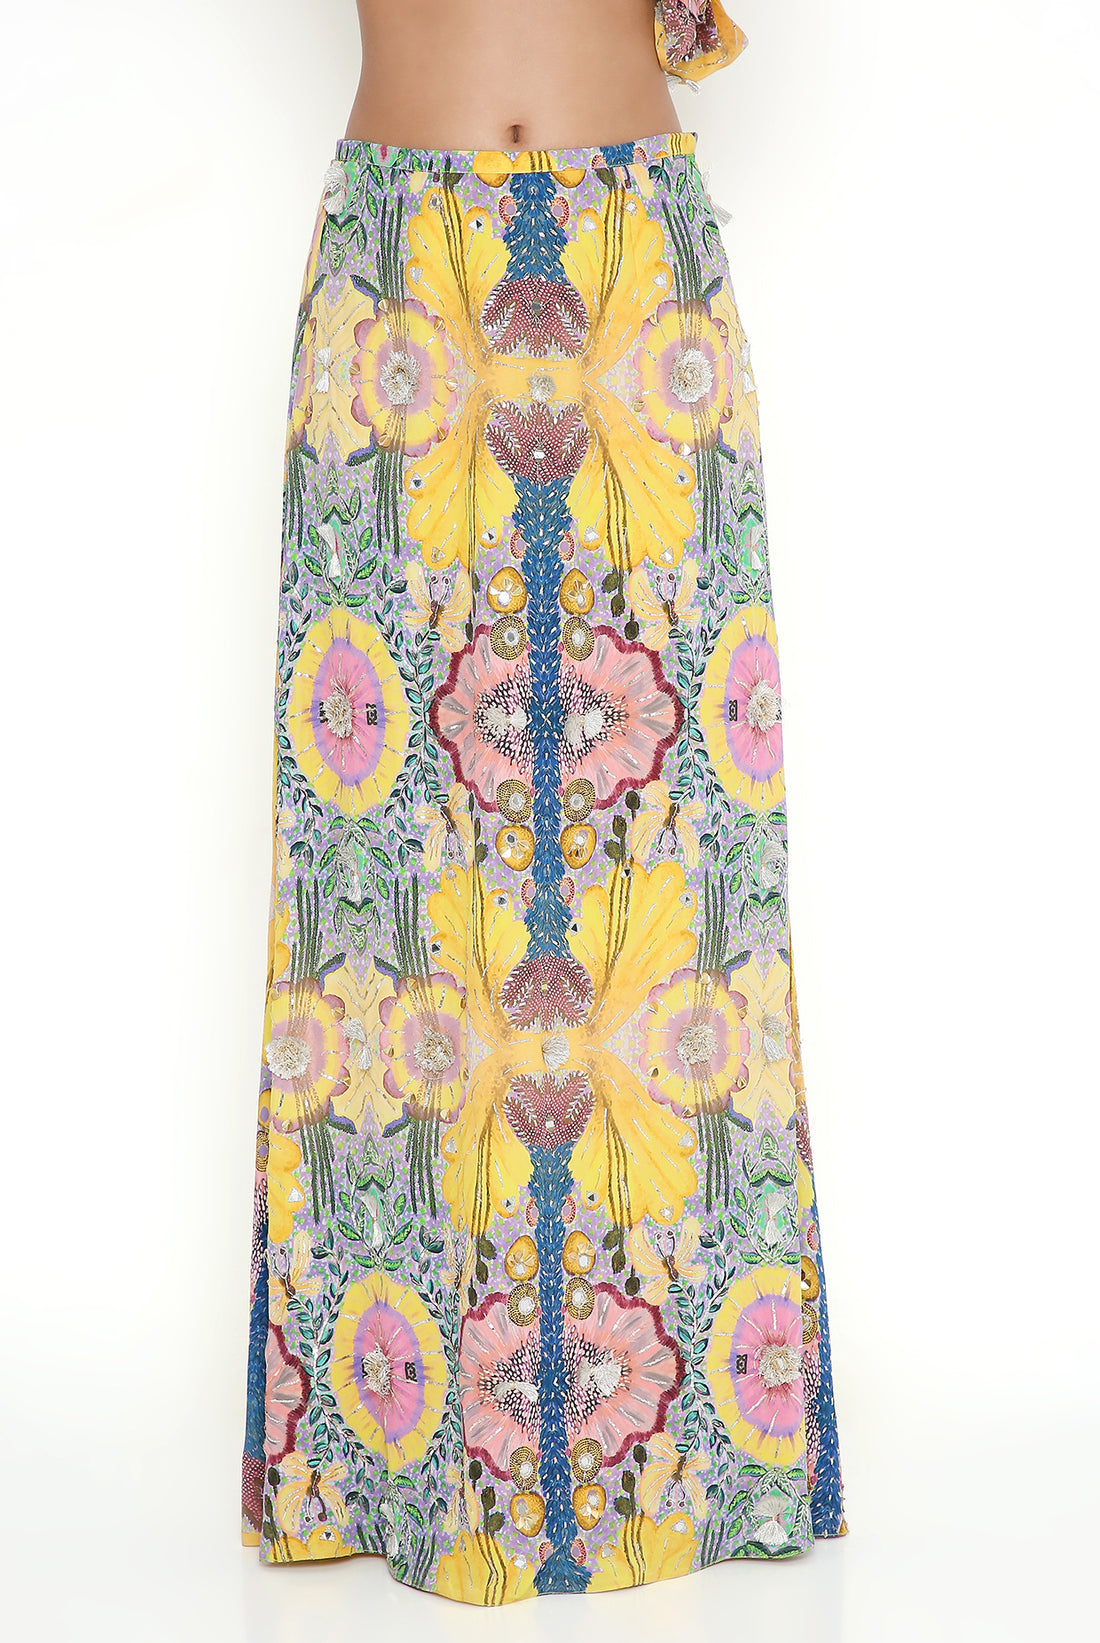 Yellow Enchanted Print  Tie-Up Choli With A Skirt